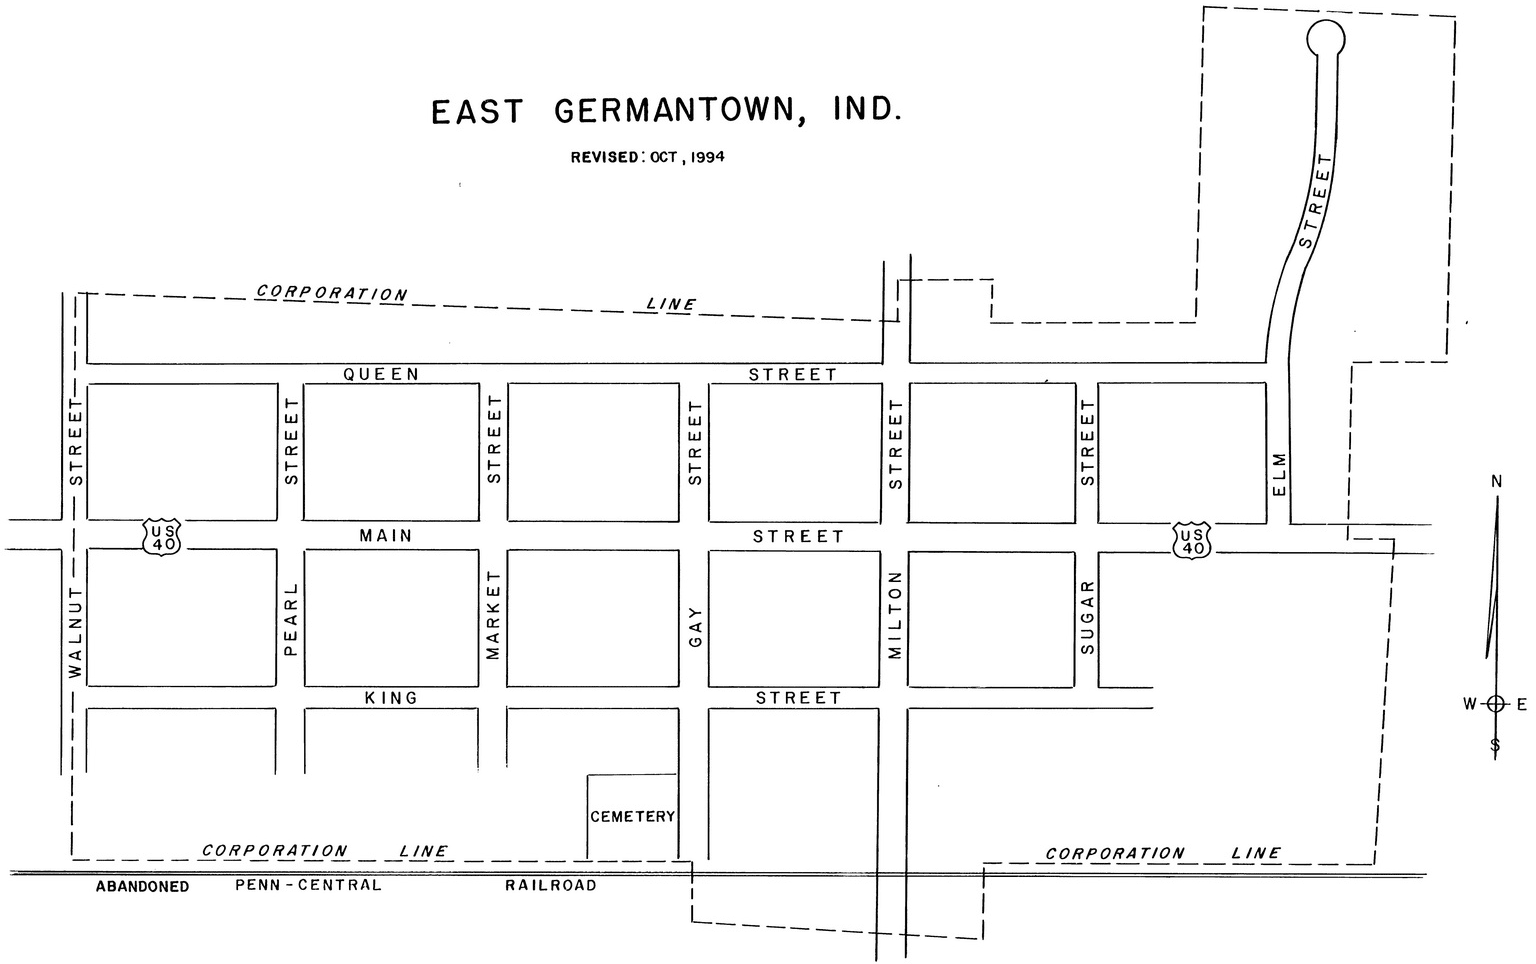 Map of East Germantown, Indiana; a.k.a. Pershing, Indiana